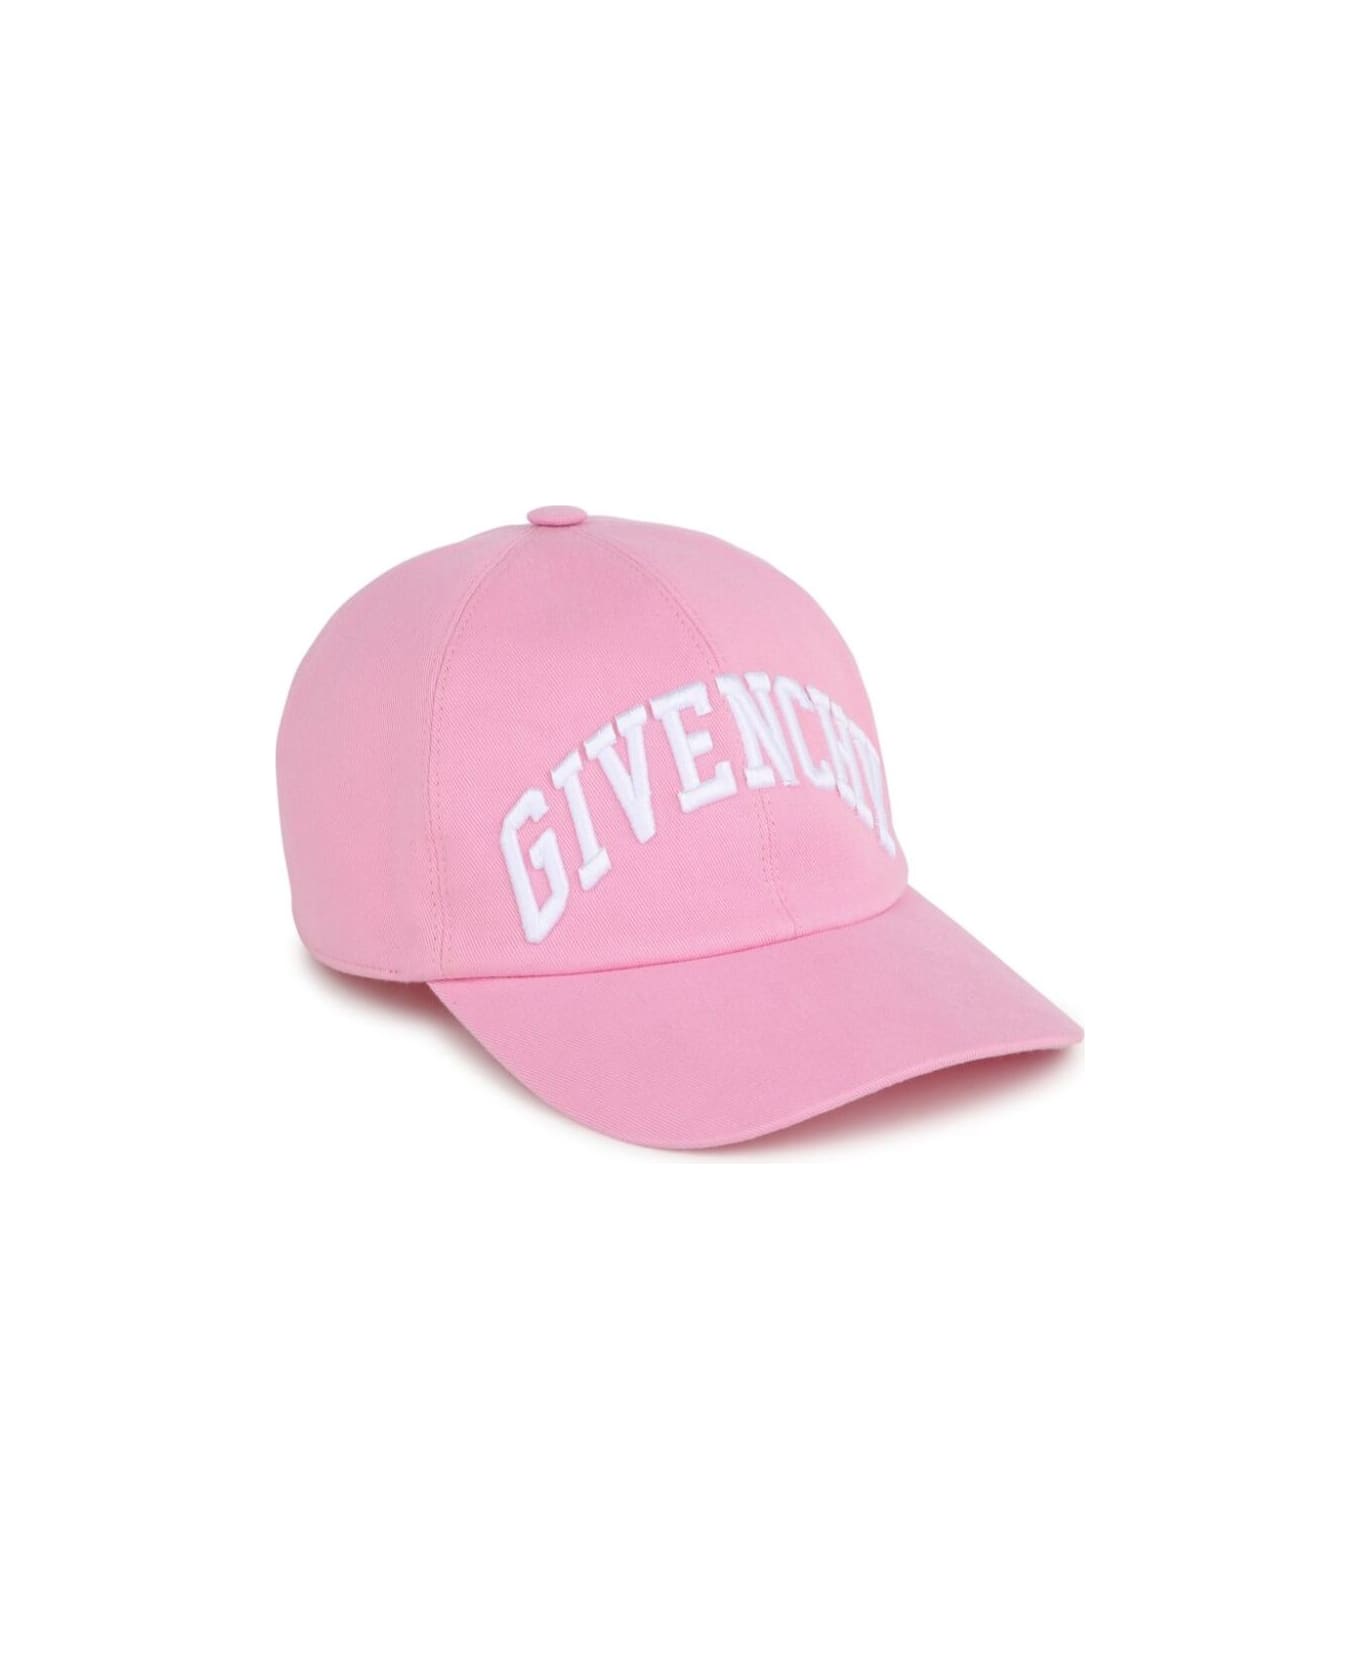 Givenchy Pink Baseball Cap With Logo Lettering Embroidery In Cotton Girl - Pink